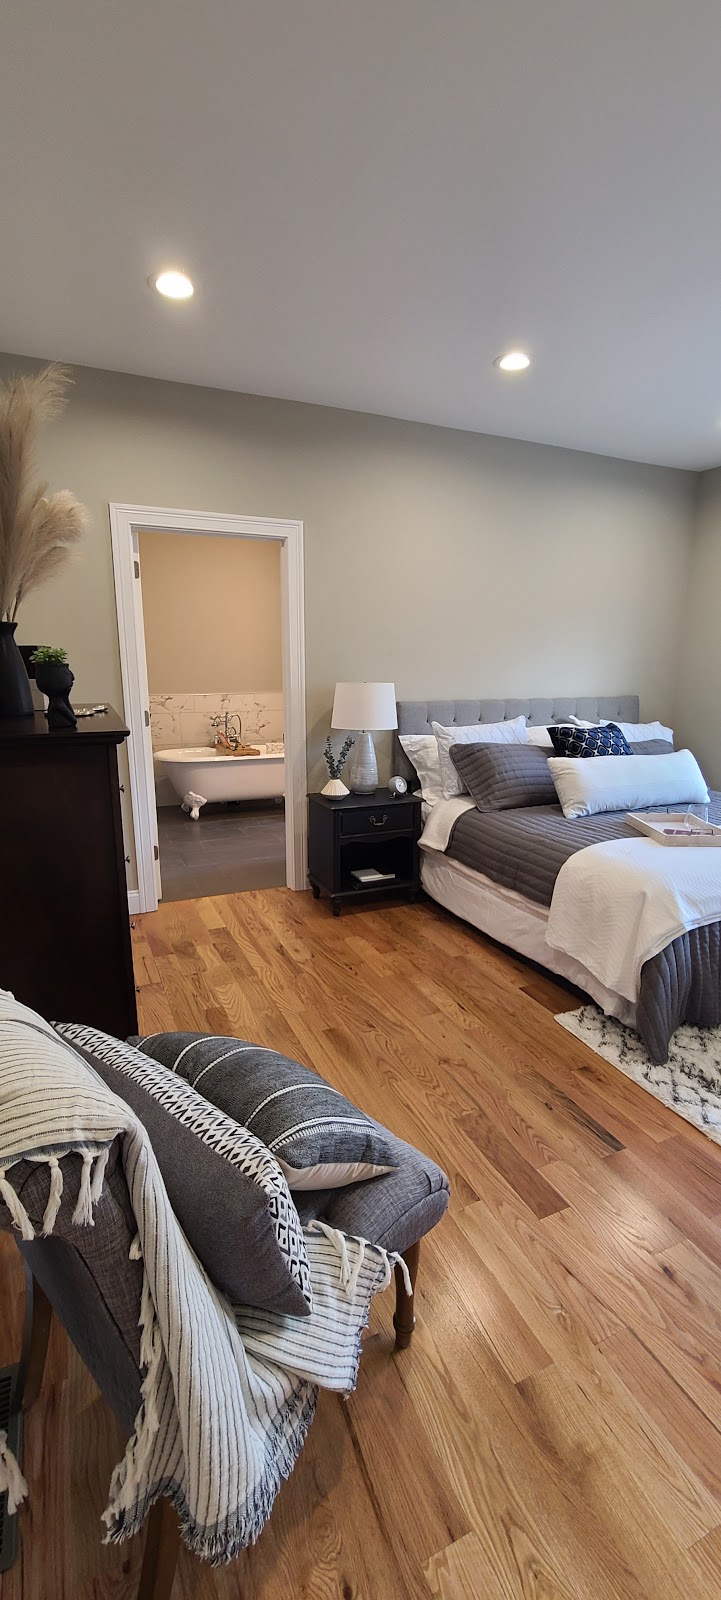 Home Staging by Design | 8 Truby St, Granby, MA 01033 | Phone: (413) 221-4807